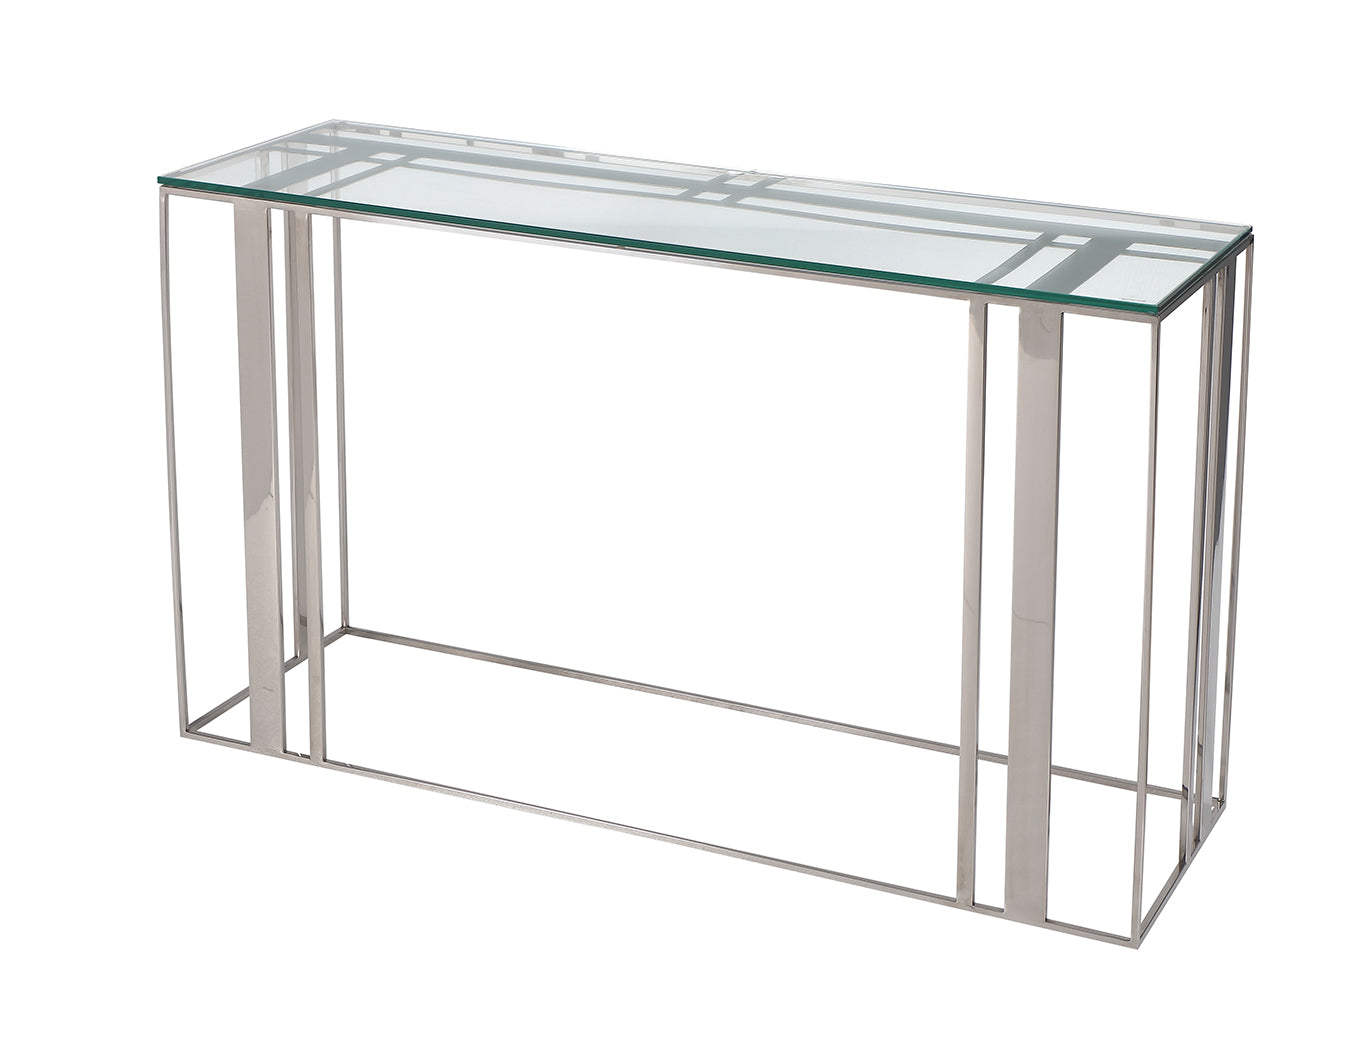  LiangAndEimilLarge-Liang & Eimil Lafayette Console Table Polished Stainless Steel-Silver 77 